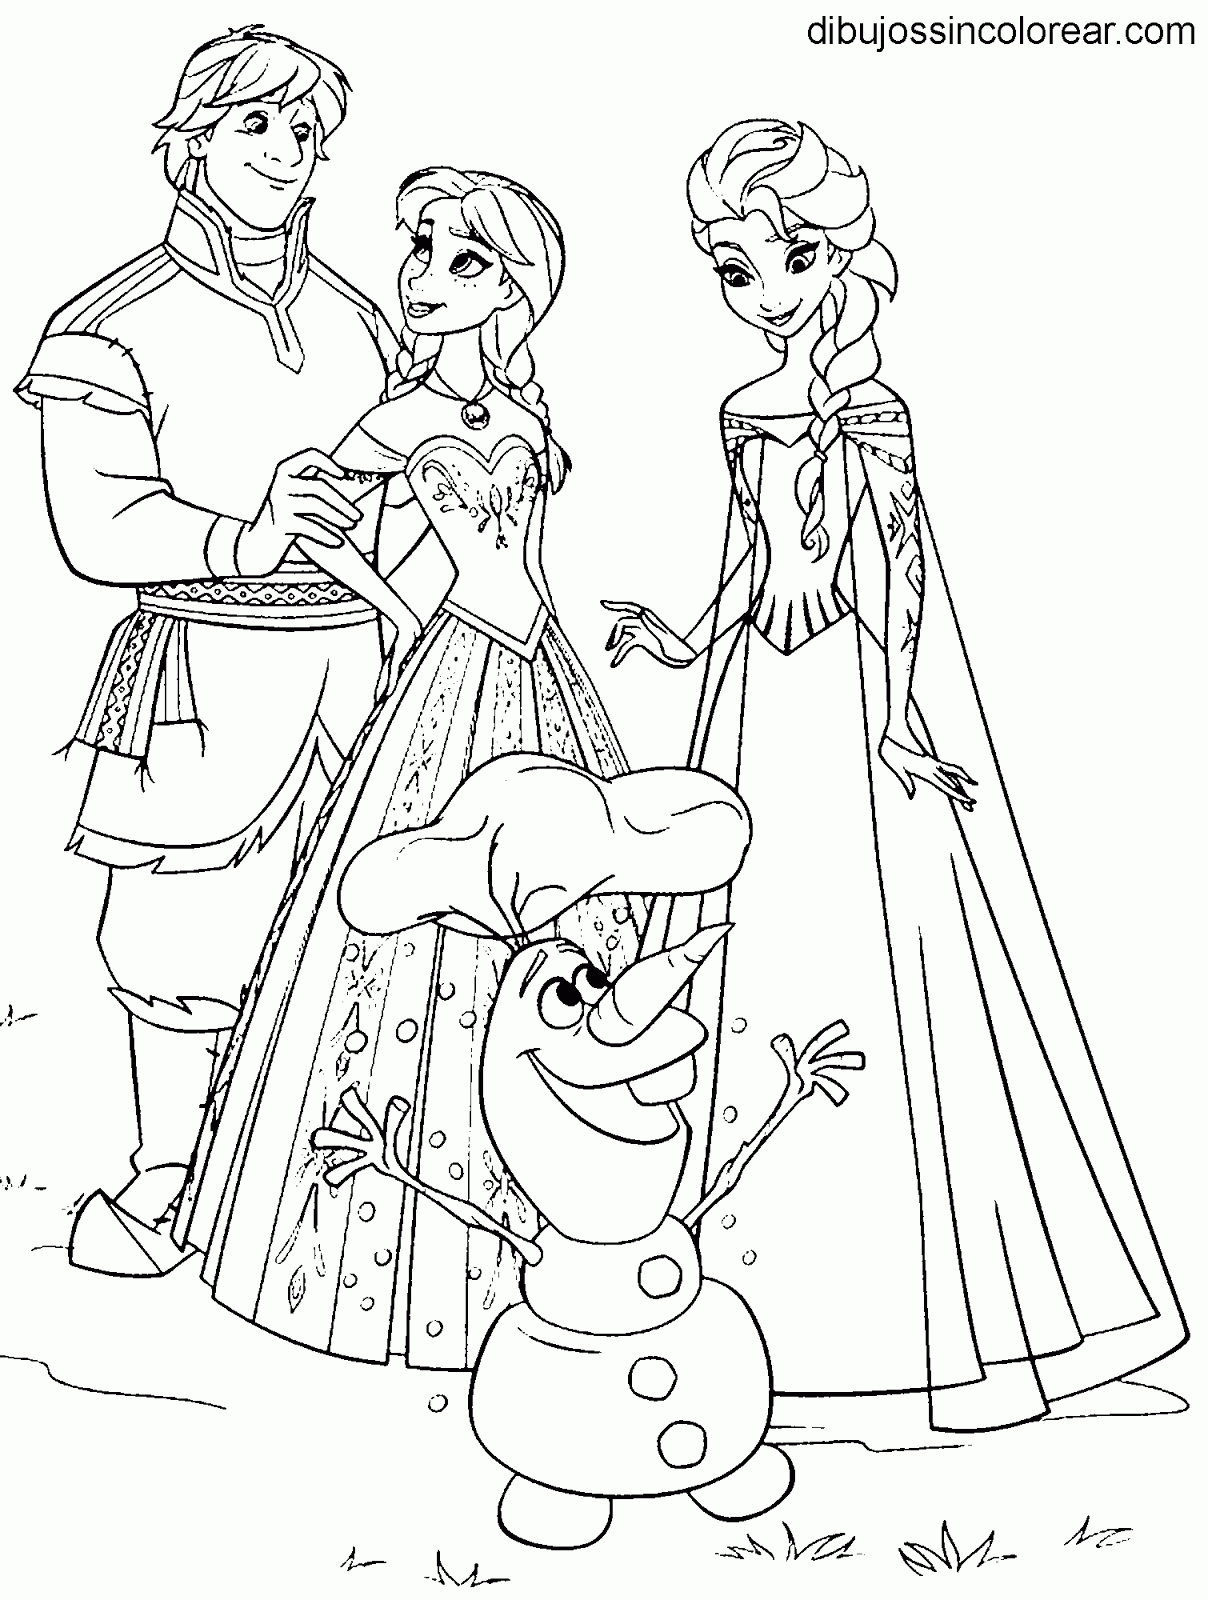 olaf frozen movie coloring pages - photo #31